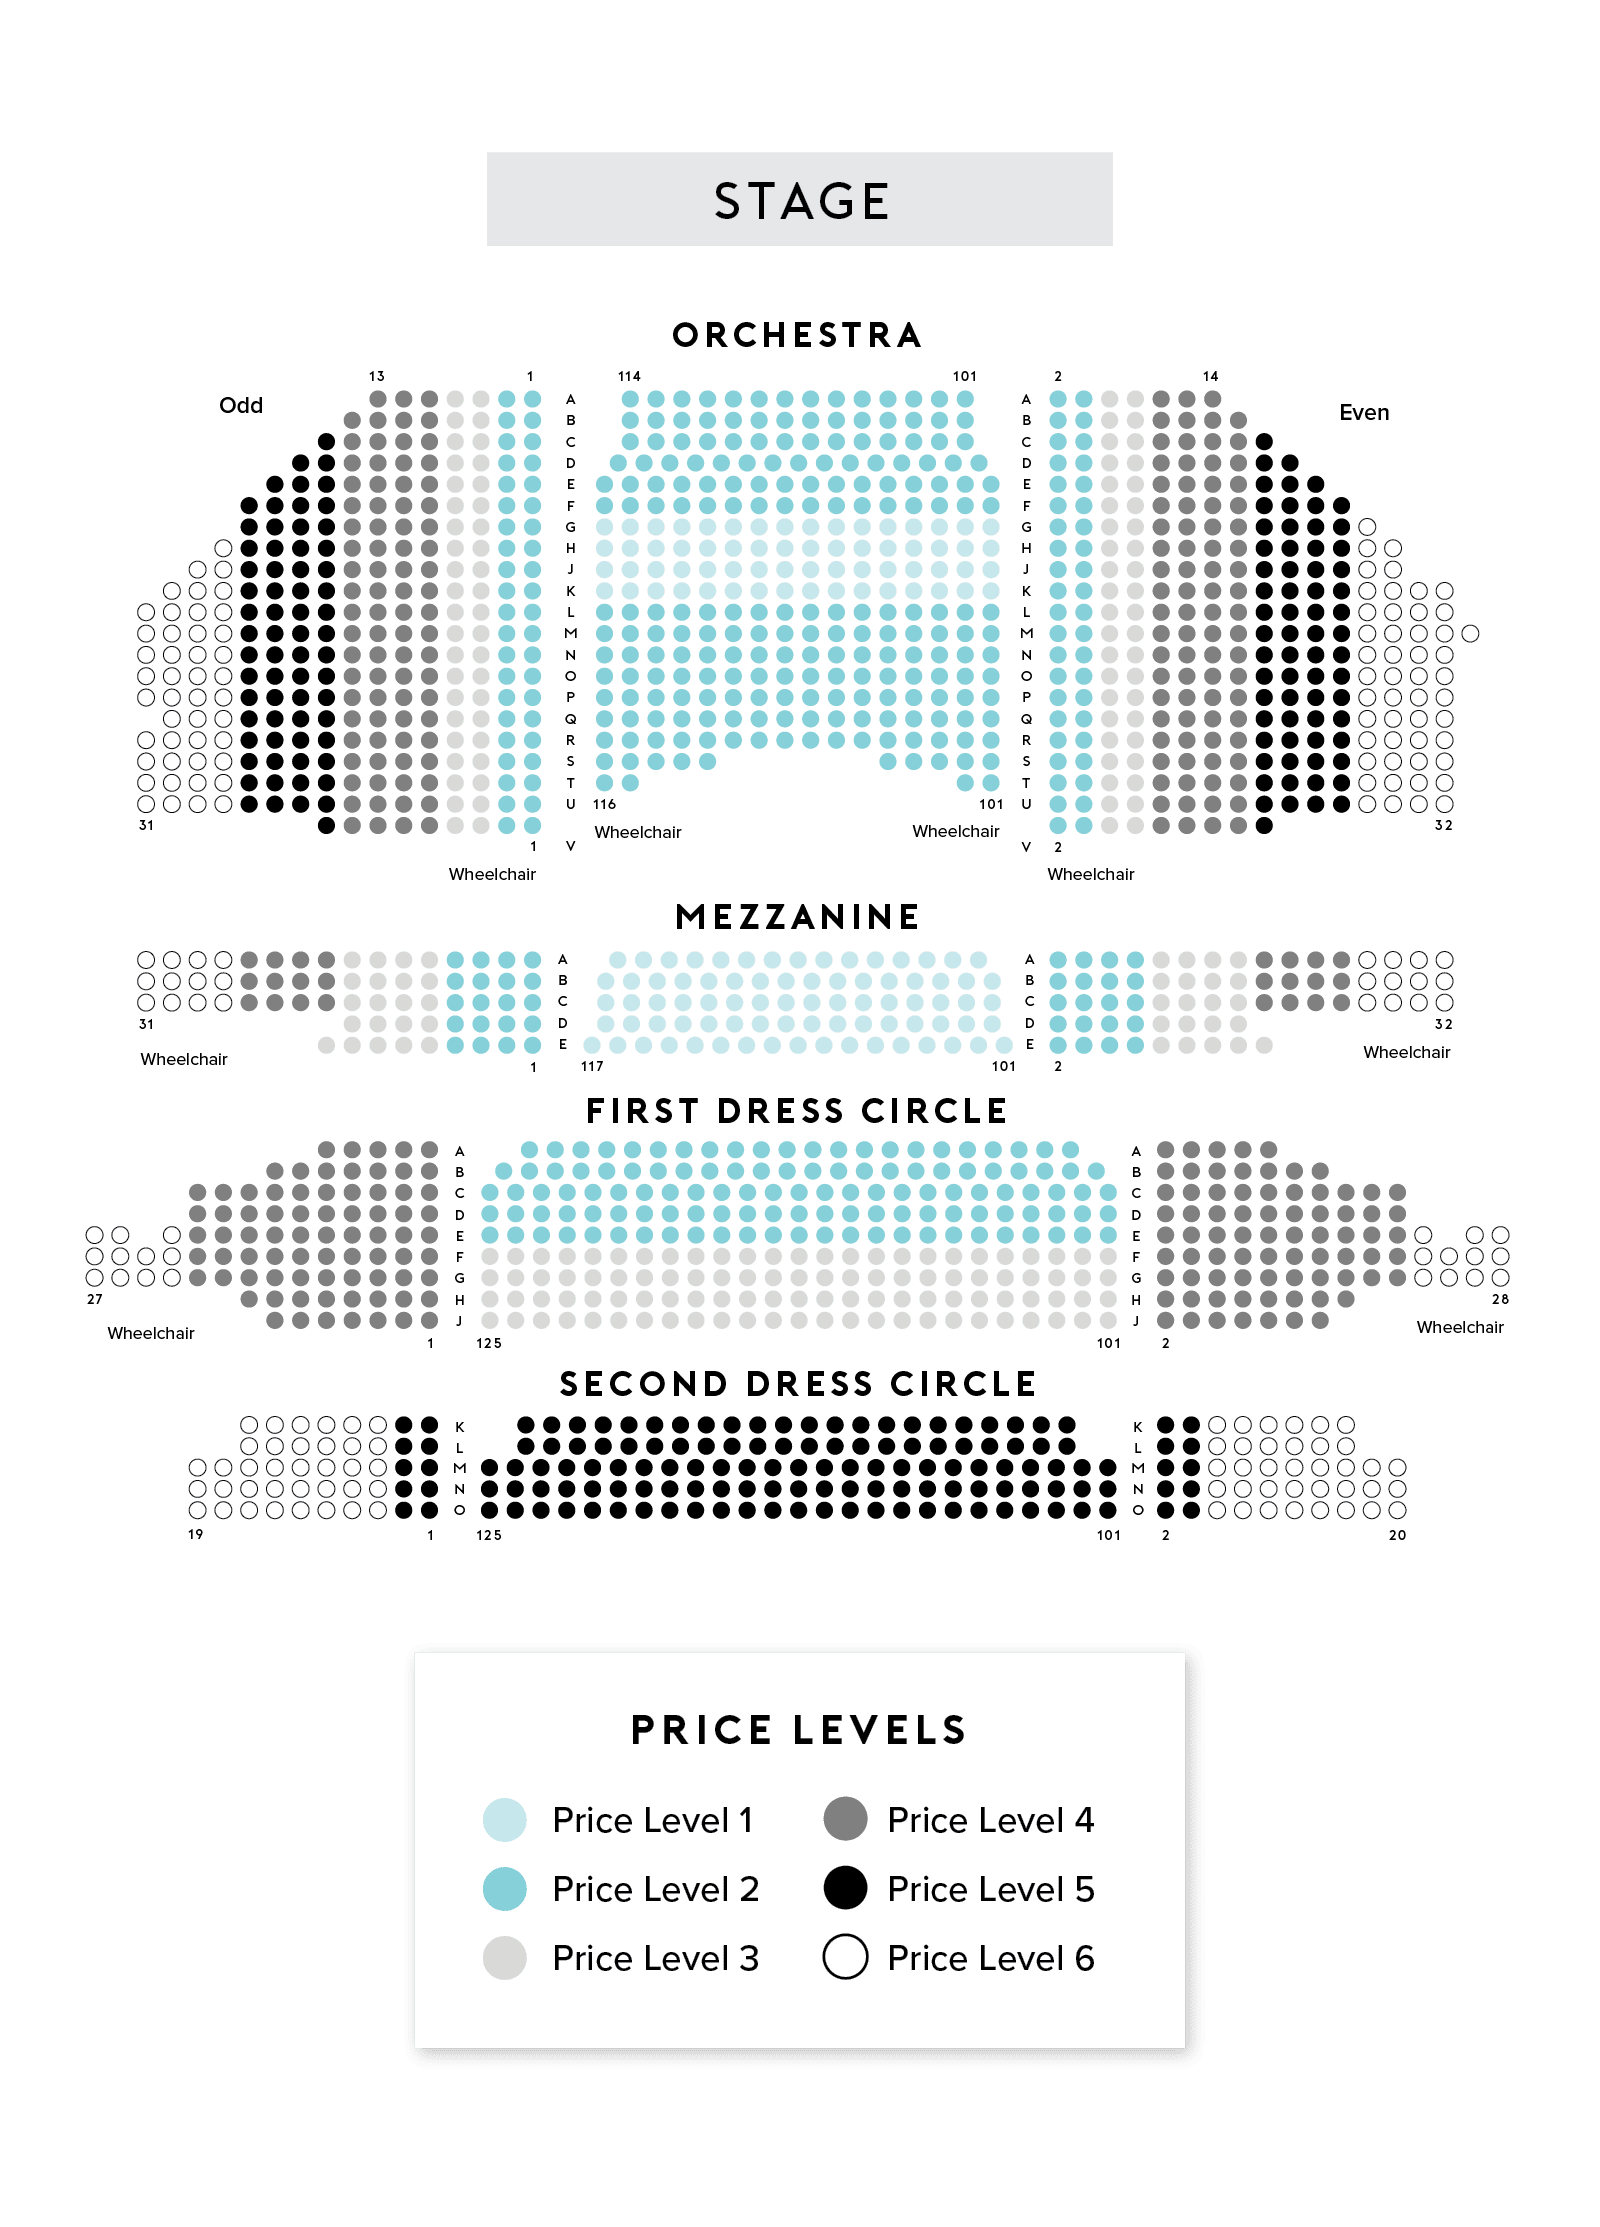 Carptenter Theatre seating chart